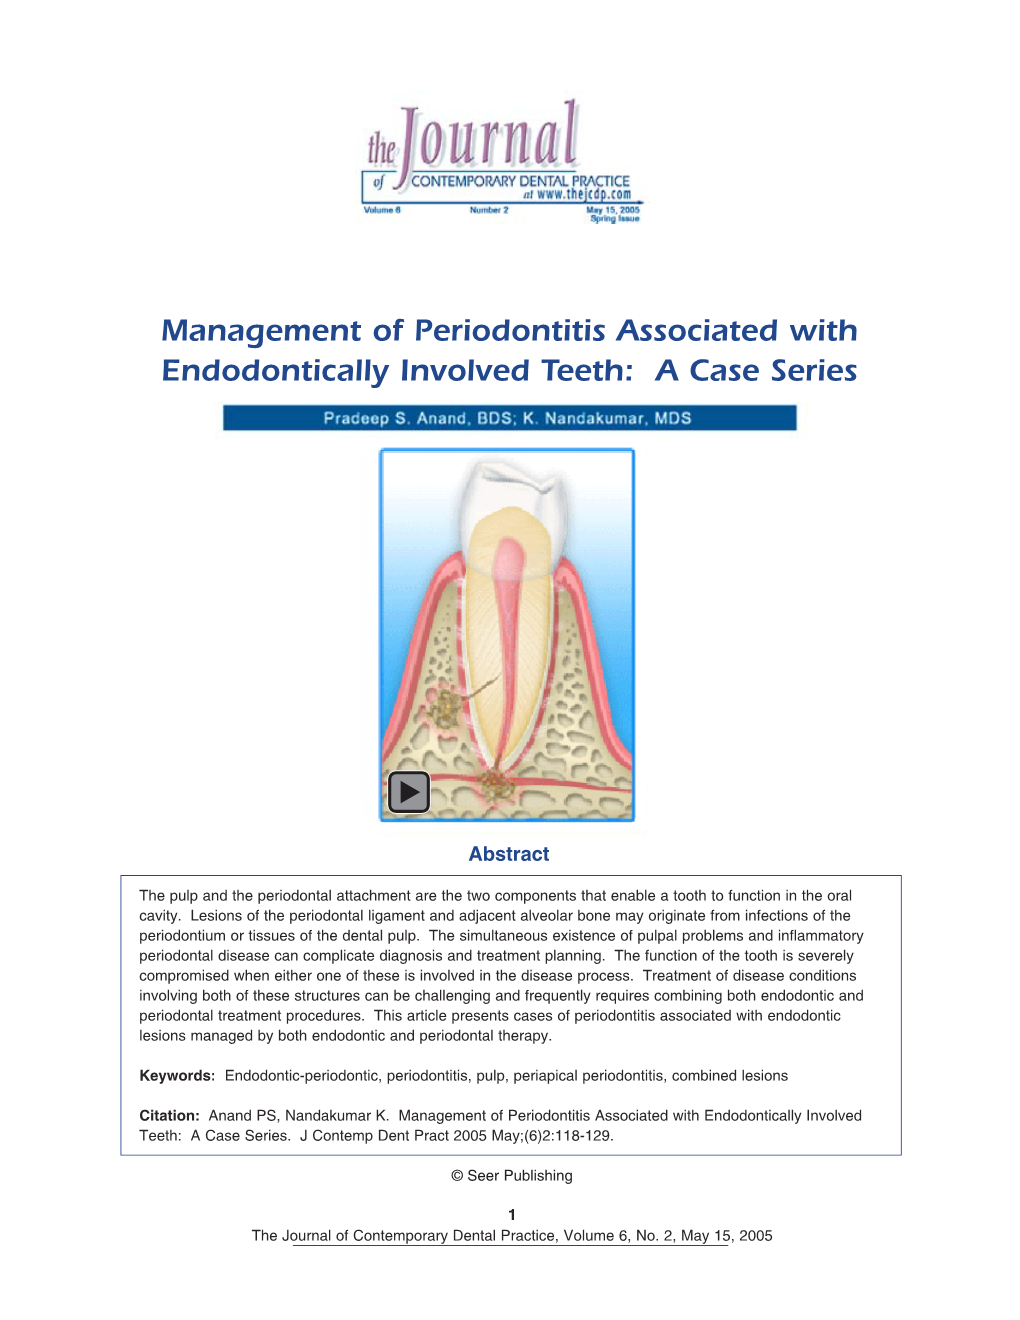 Management of Periodontitis Associated with Endodontically Involved Teeth: a Case Series